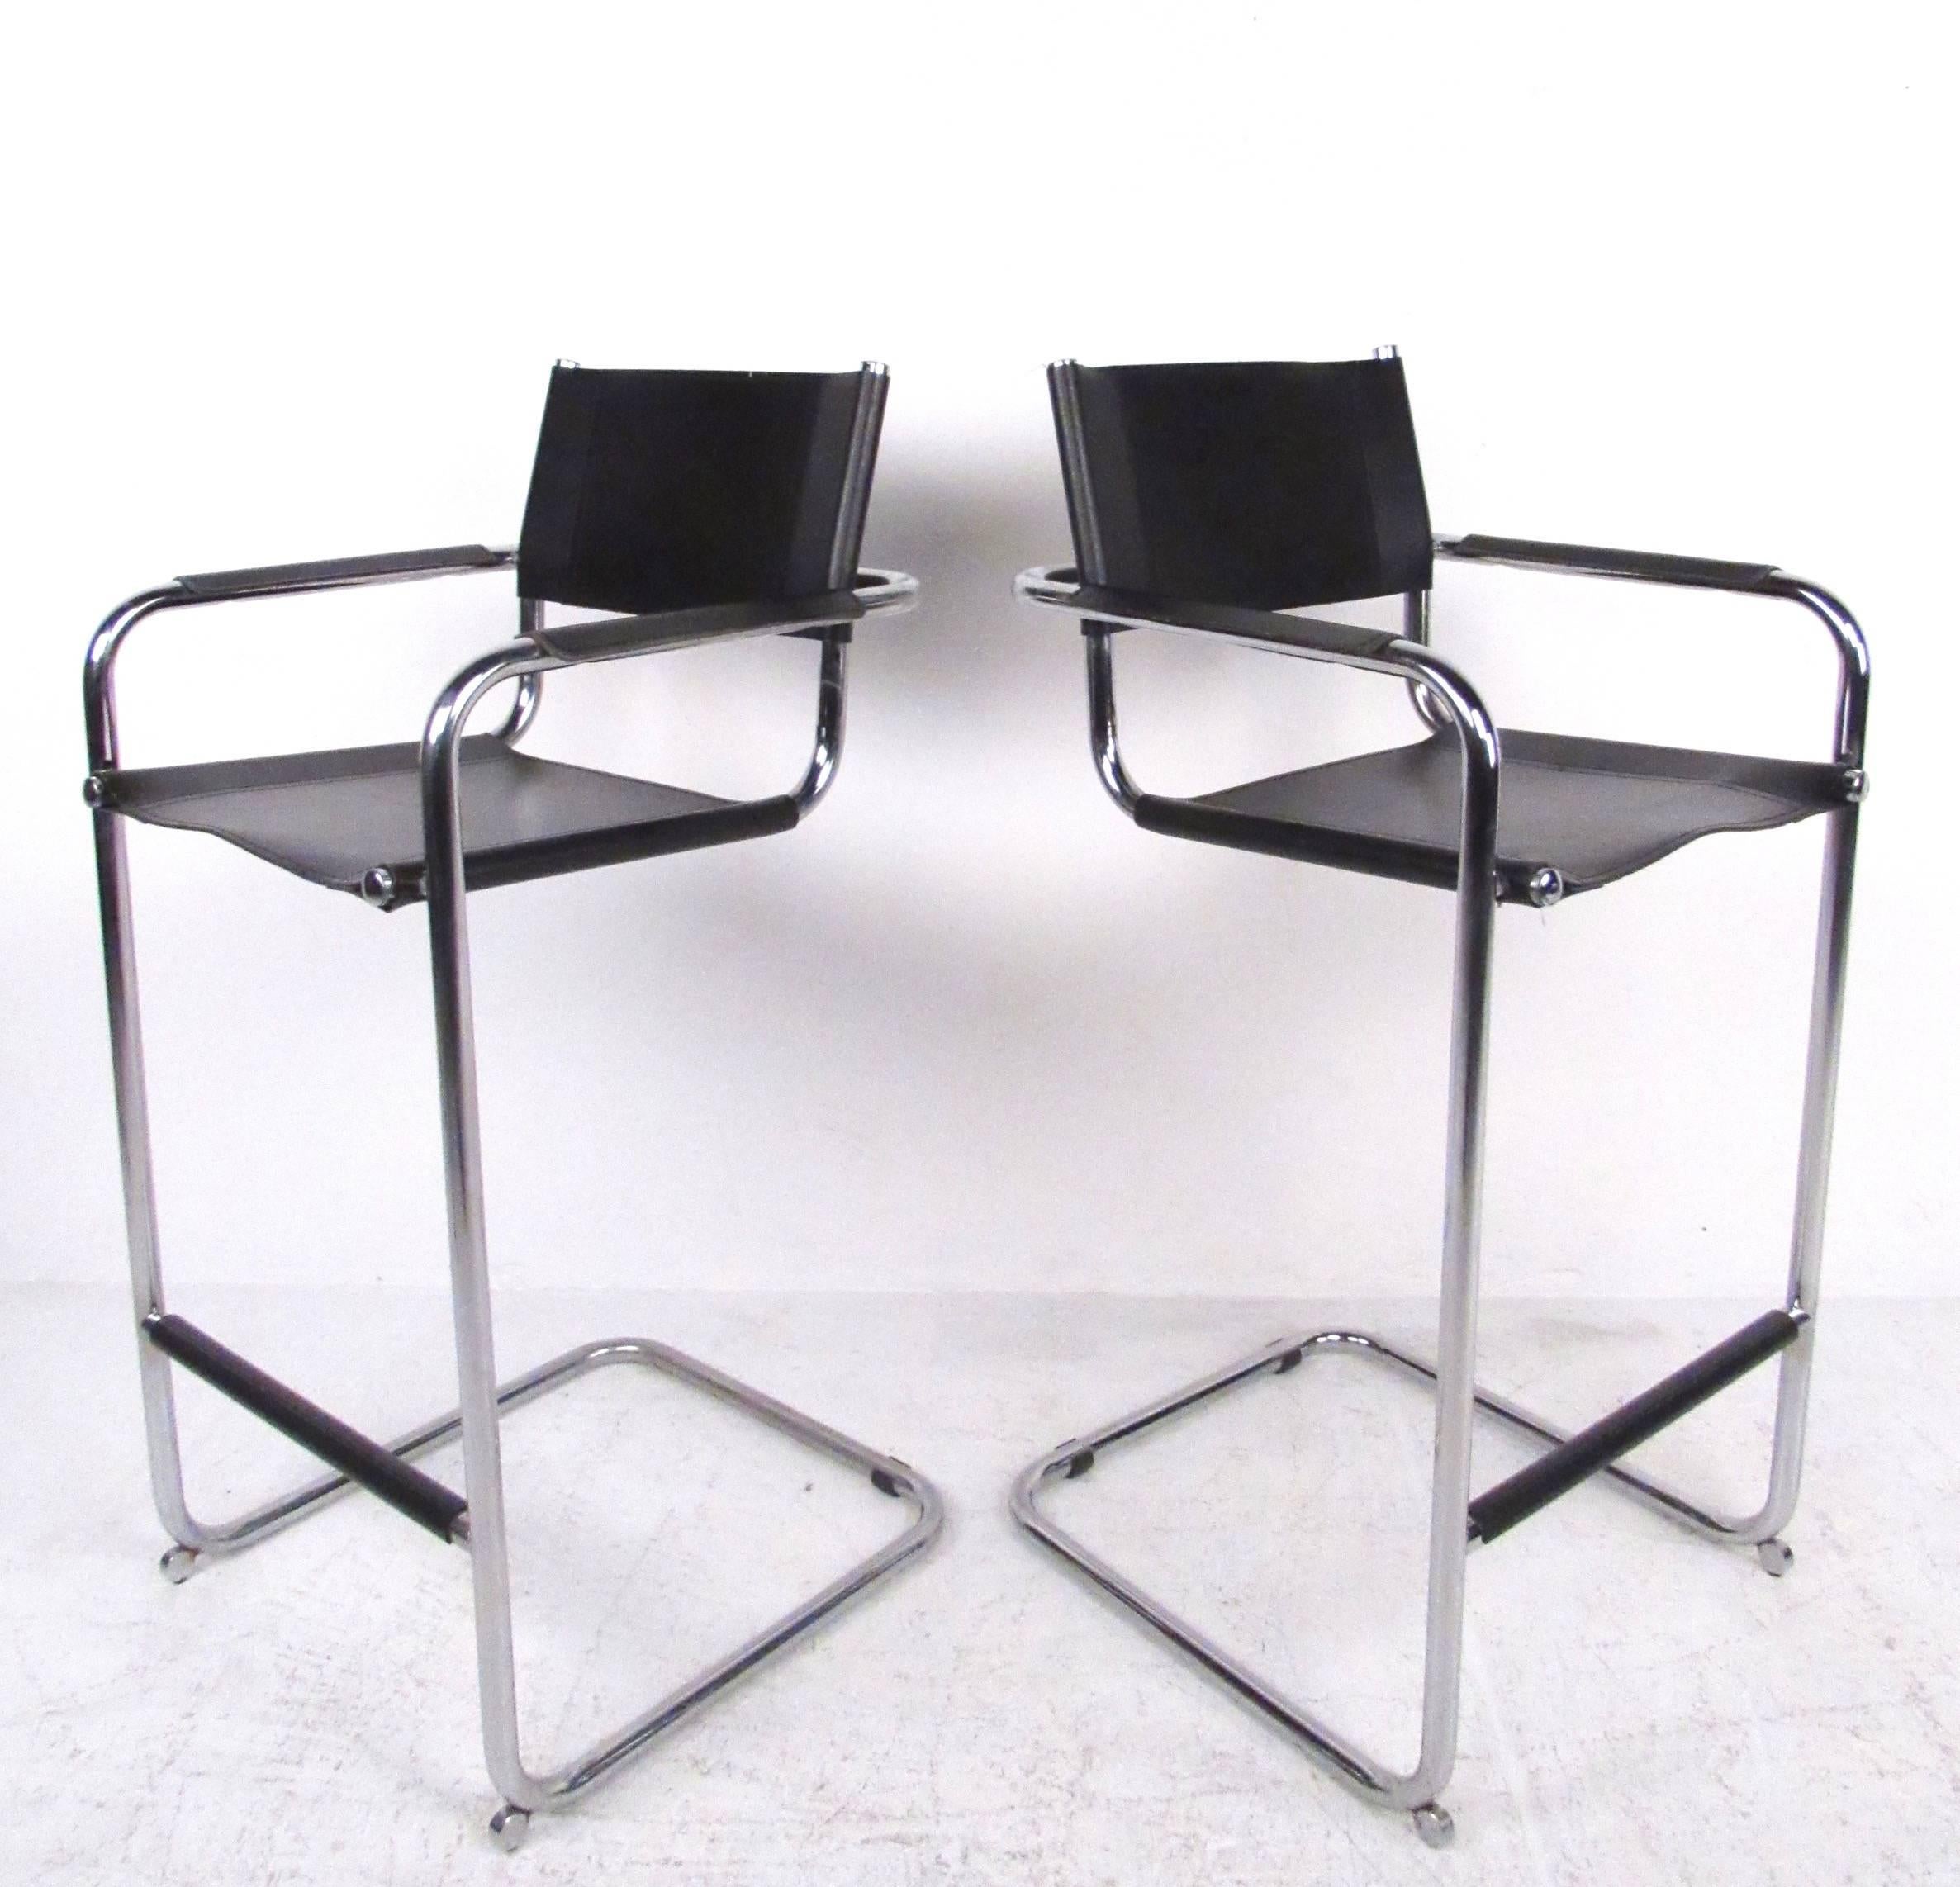 This stylish pair of Stendig style bar stools feature leather strap seats on tubular chrome frames with cantilever bases. Leather arm and footrest adds comfort and Mid-Century style detail to this matching pair. Please confirm item location (NY or